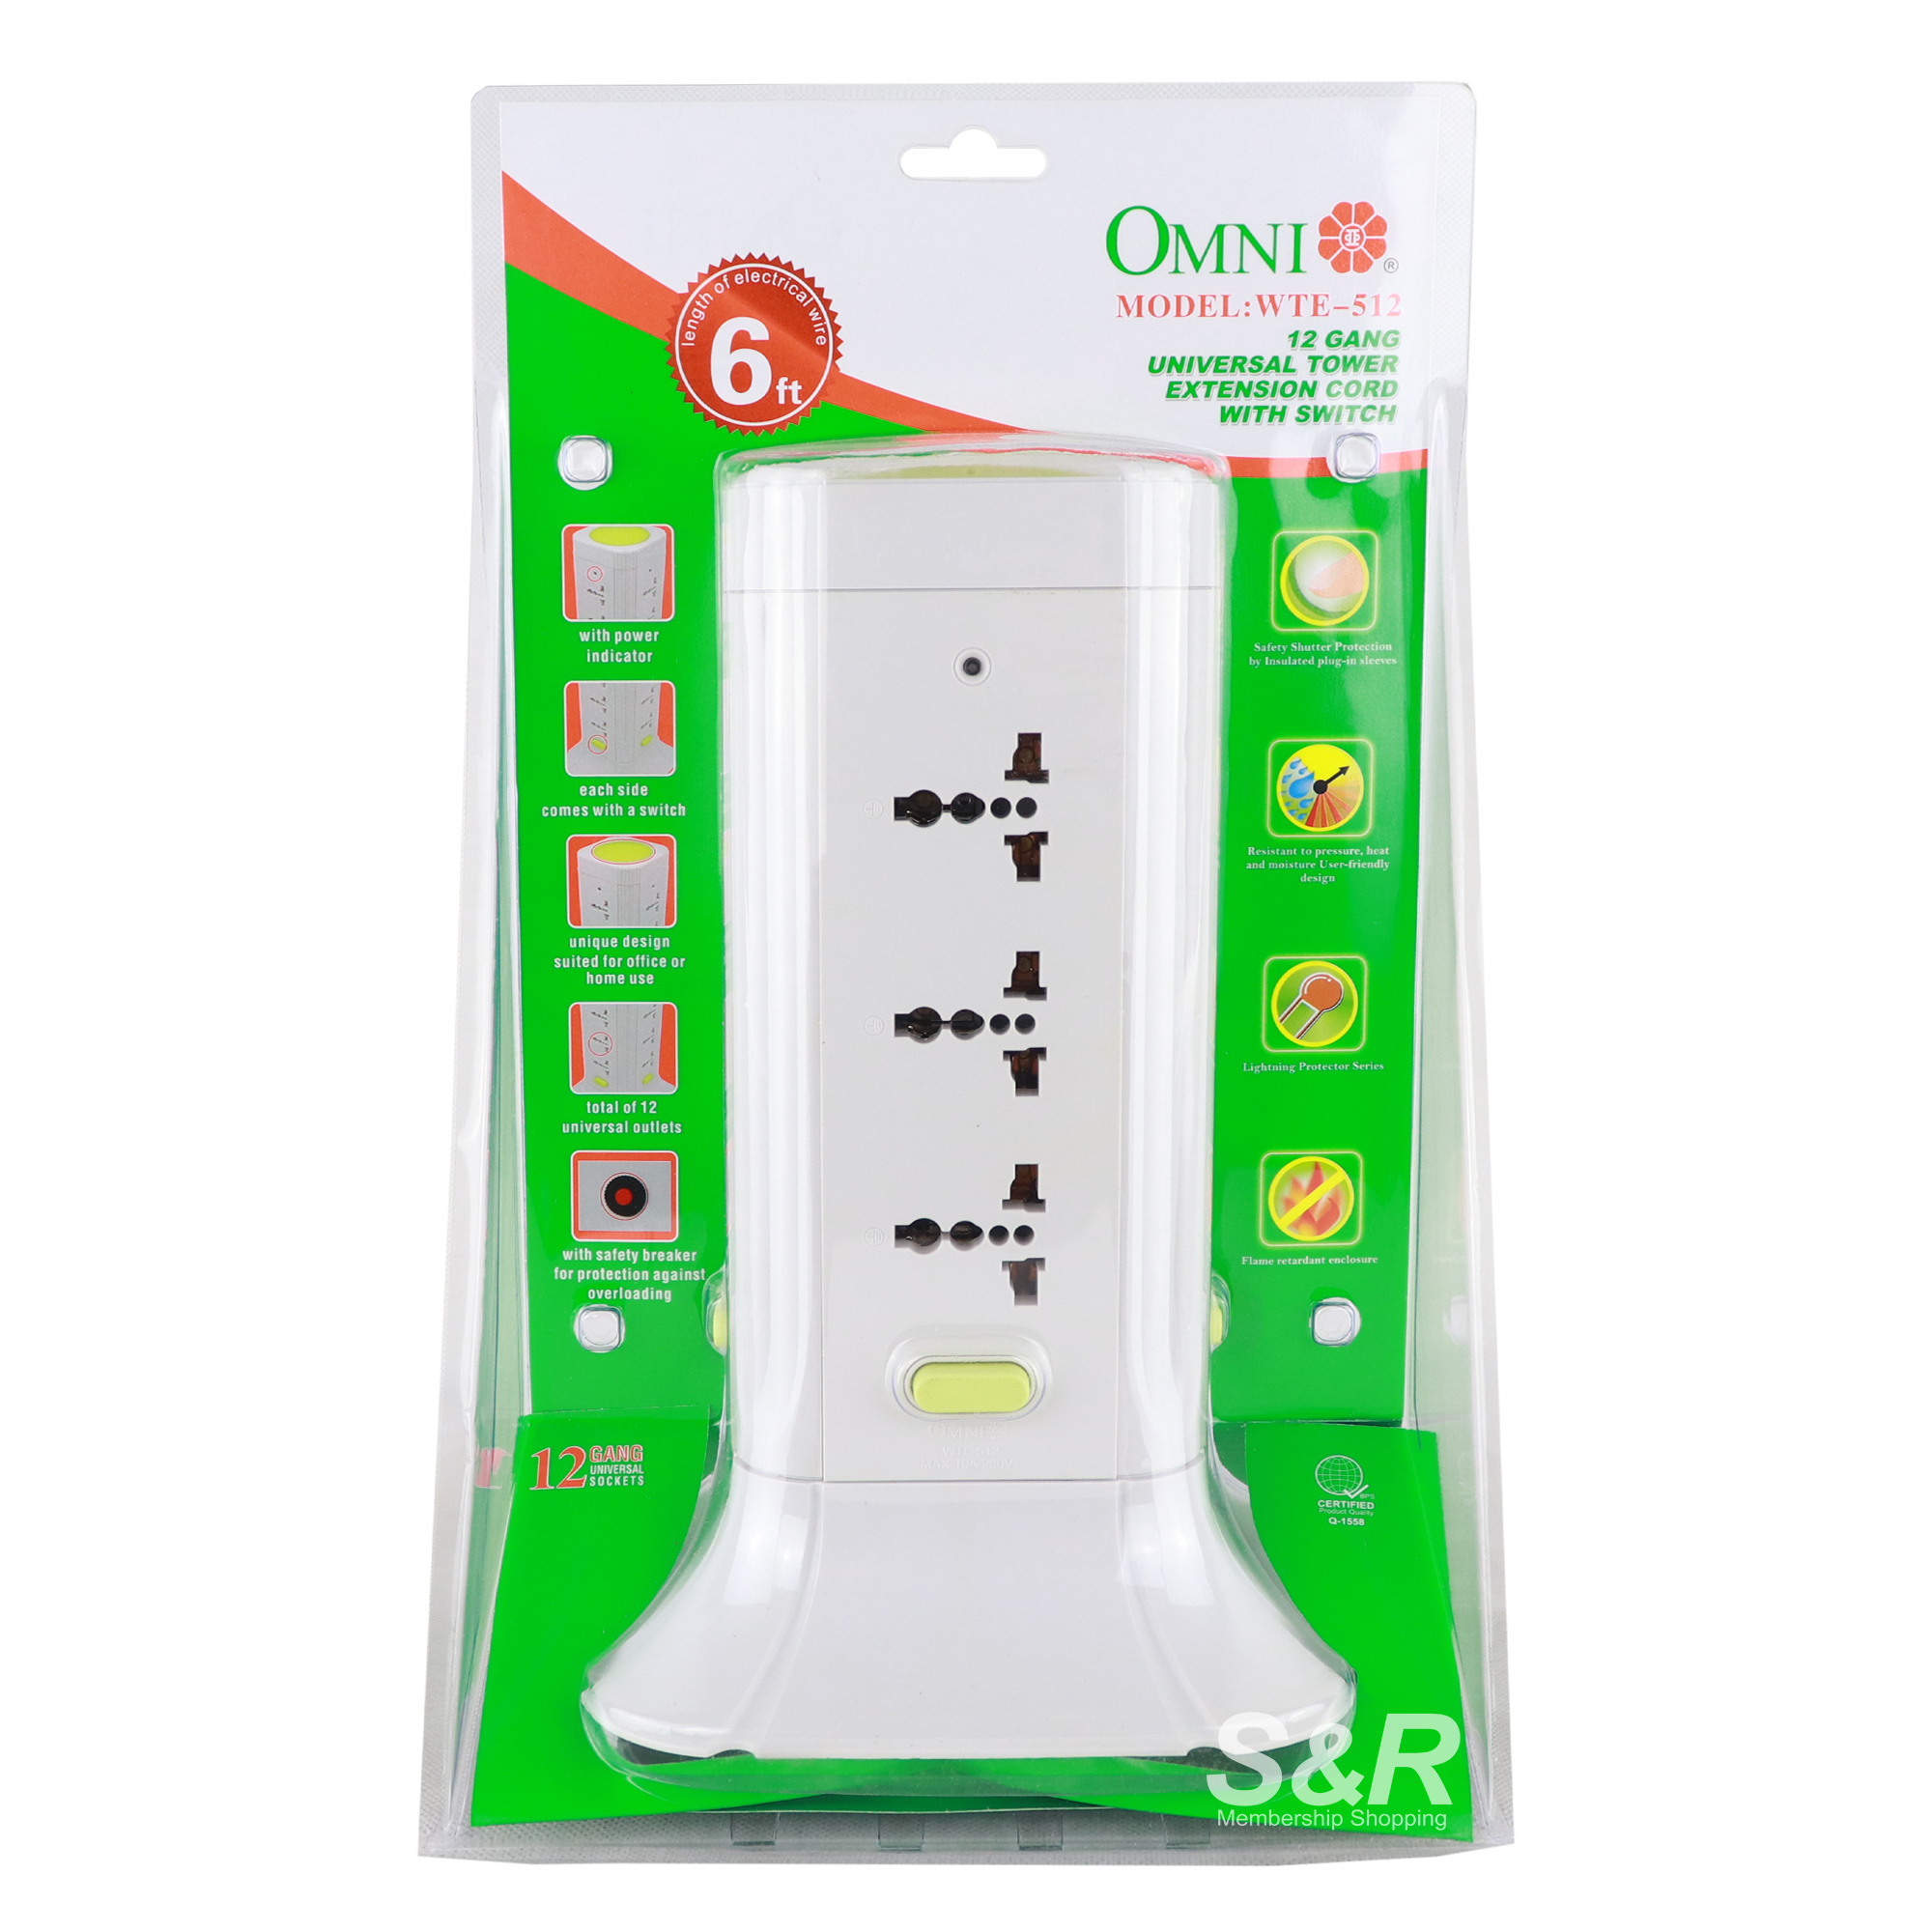 Omni 12-Gang Universal Tower Extension Cord with Switch WTE-512 1pc